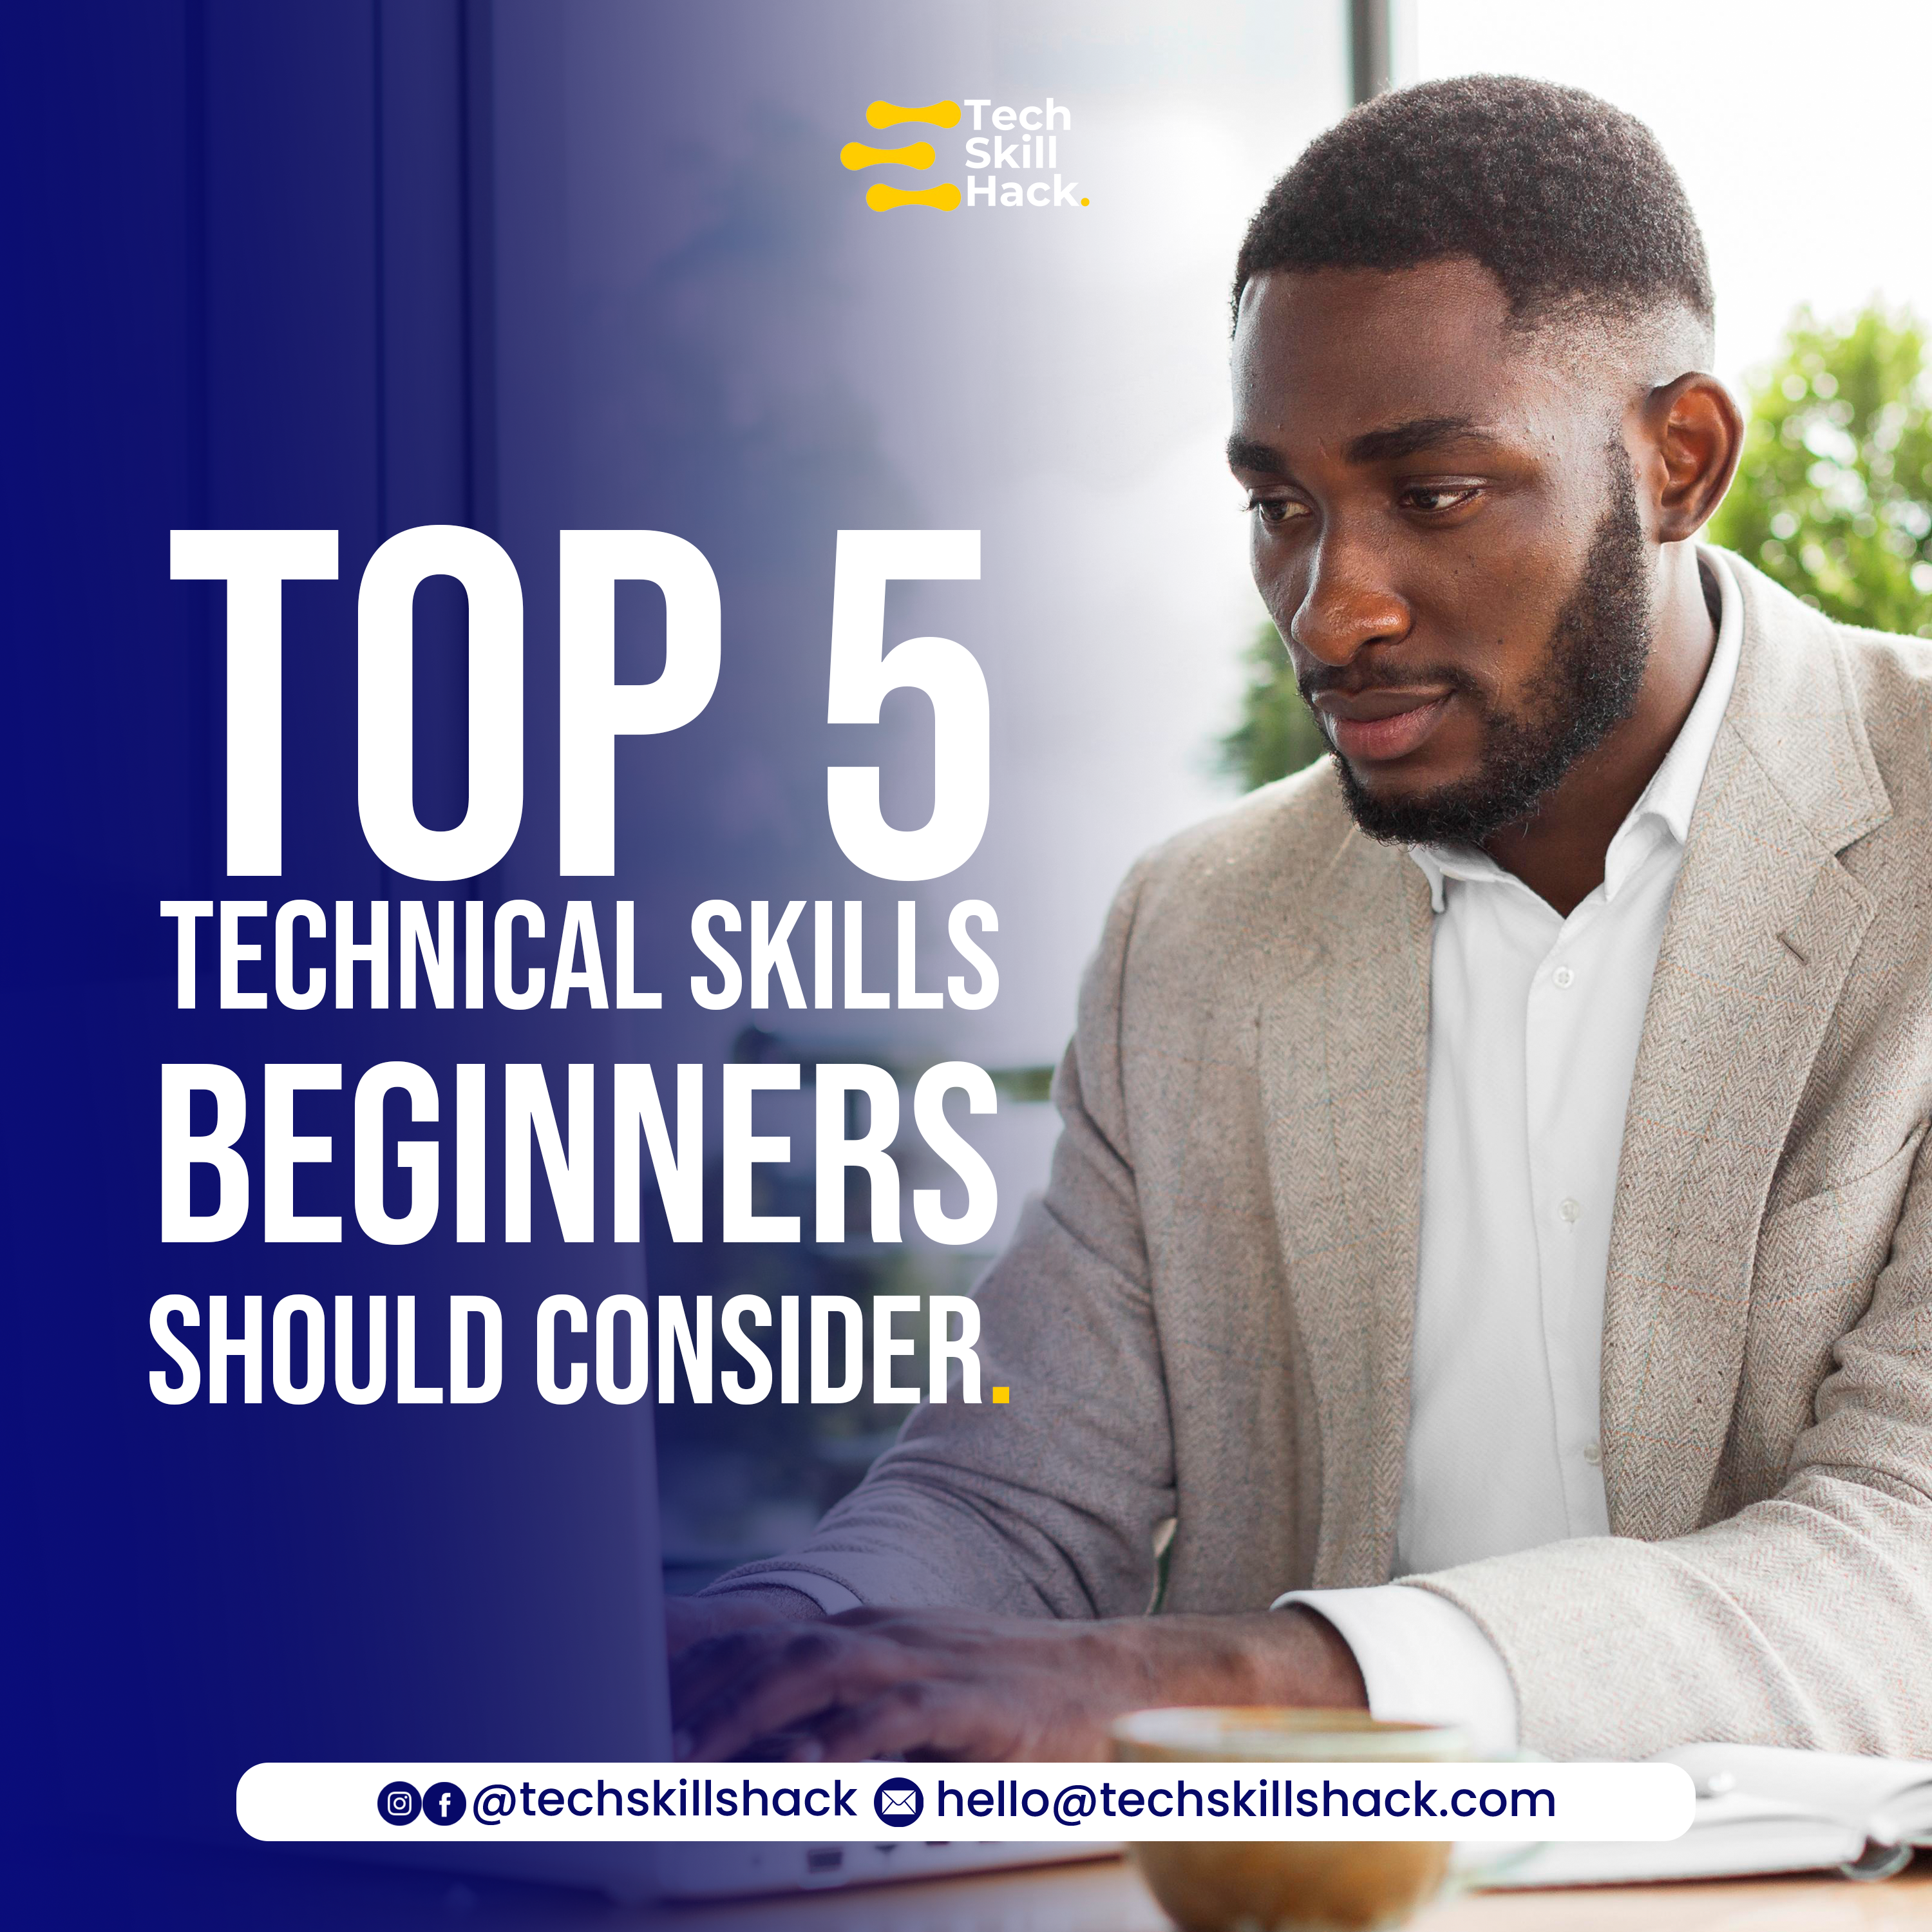 TOP 5 TECHNICAL SKILLS BEGINNERS SHOULD CONSIDER